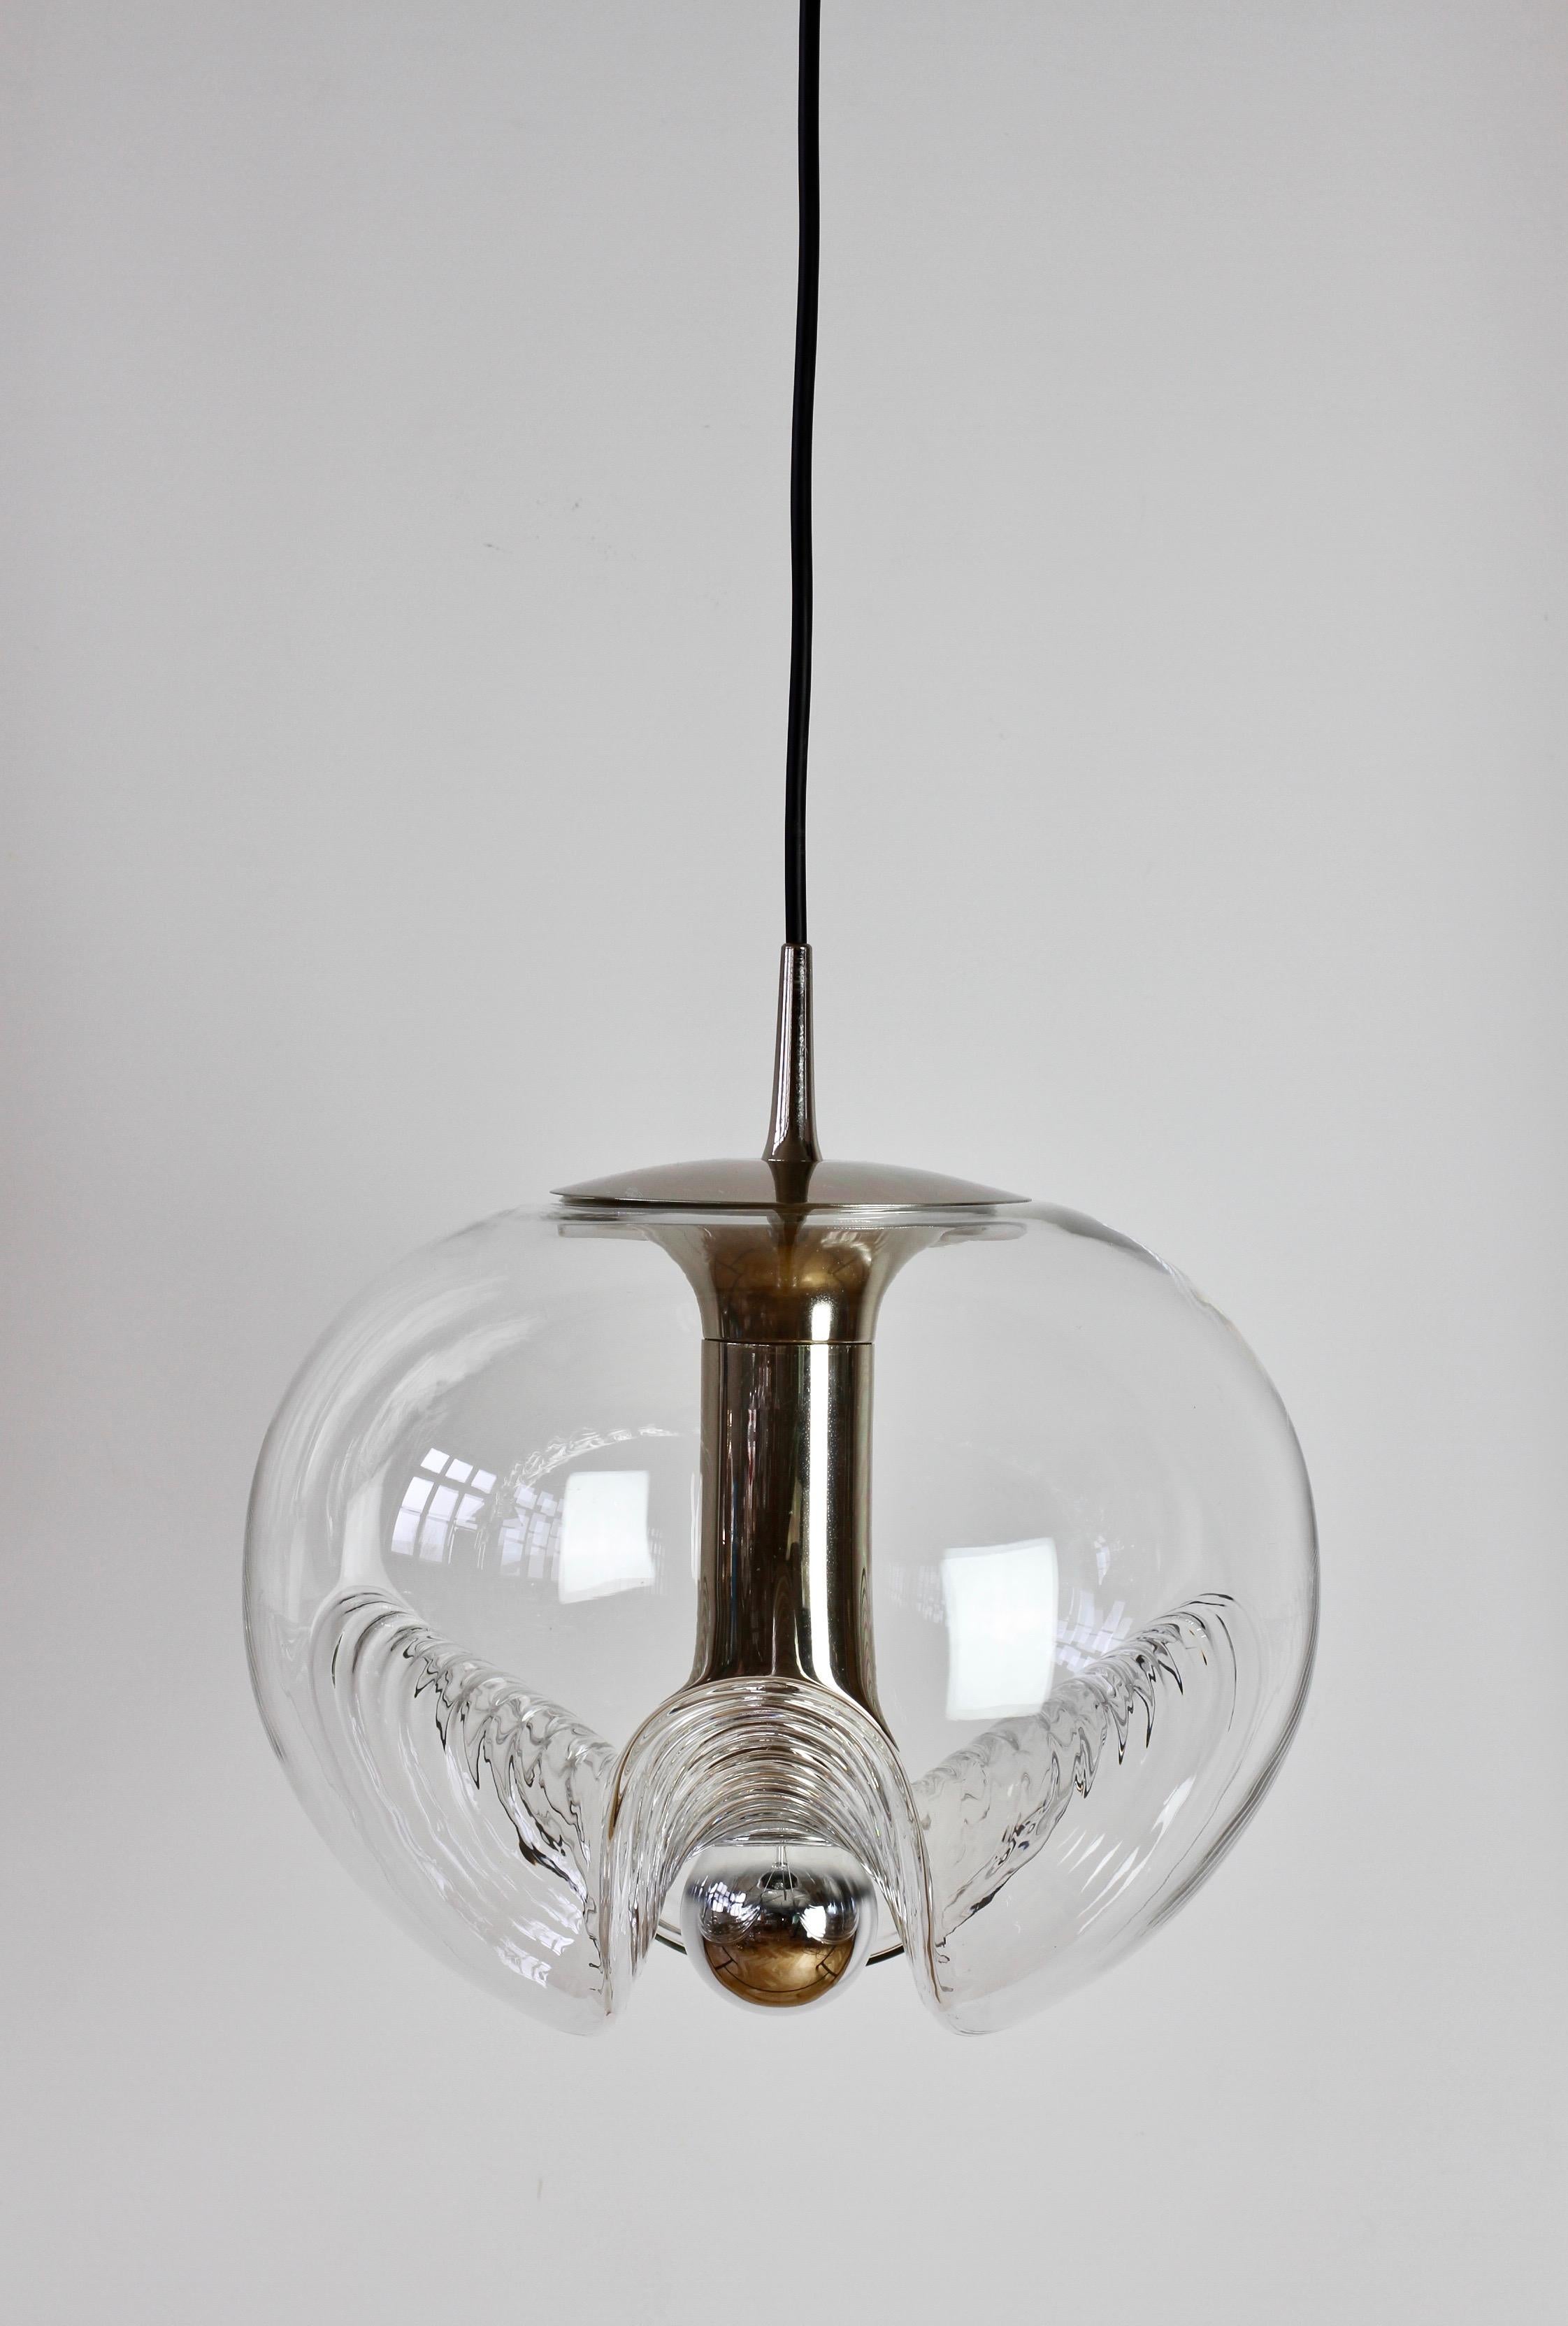 Beautiful midcentury pendant light by Peill & Putzler in the 1970s. This is an absolutely Classic piece of design, featuring a clear glass globe shade with a waved or ribbed molded bubble form, casting a beautiful rippled light. 

This is the